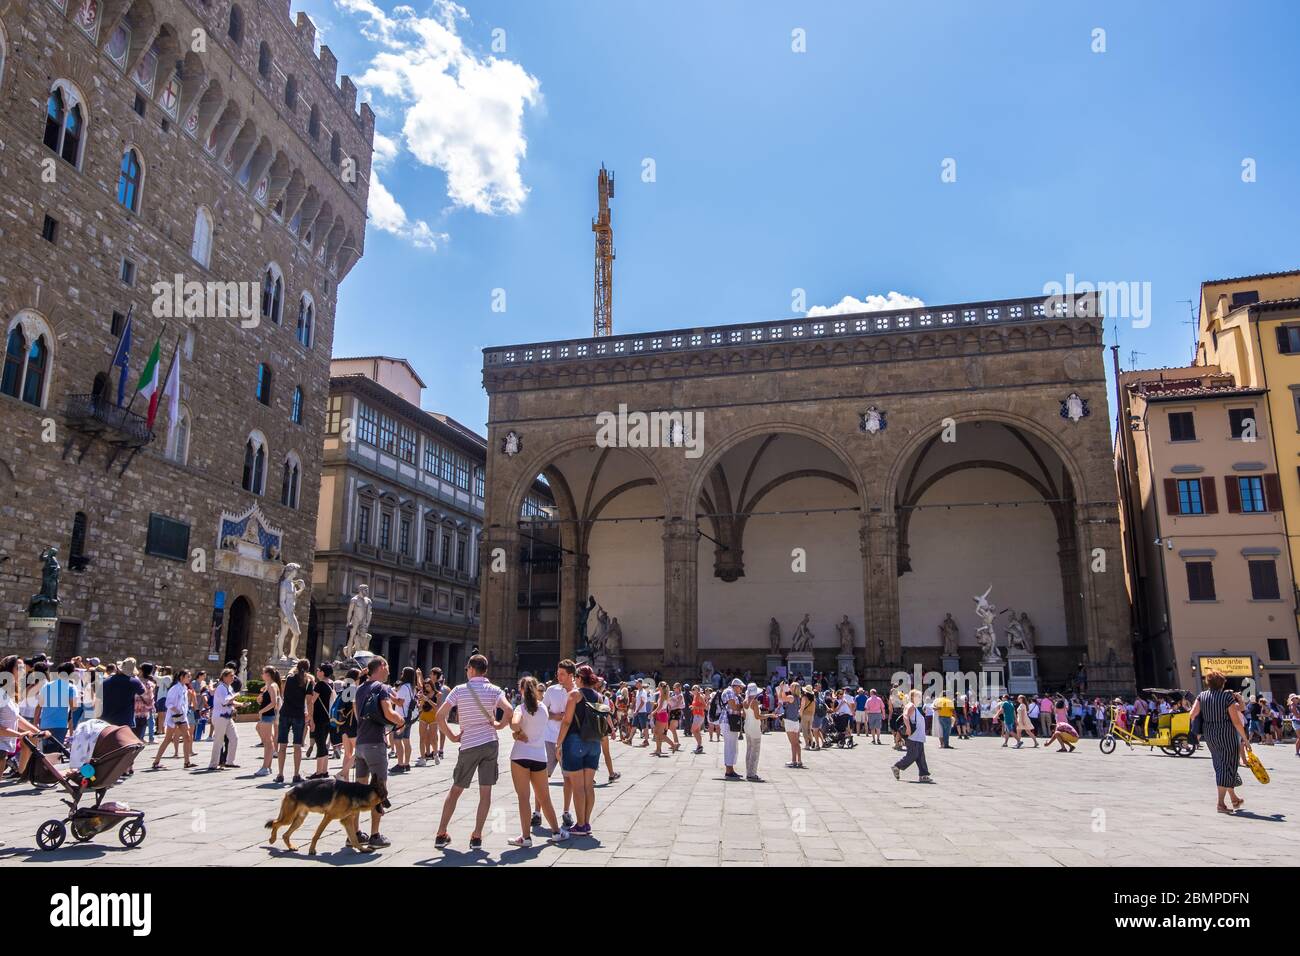 Florence, Italy - August 16, 2019: Piazza della Signoria with Palazzo Vecchio in Florence, Tuscany, Italy Stock Photo